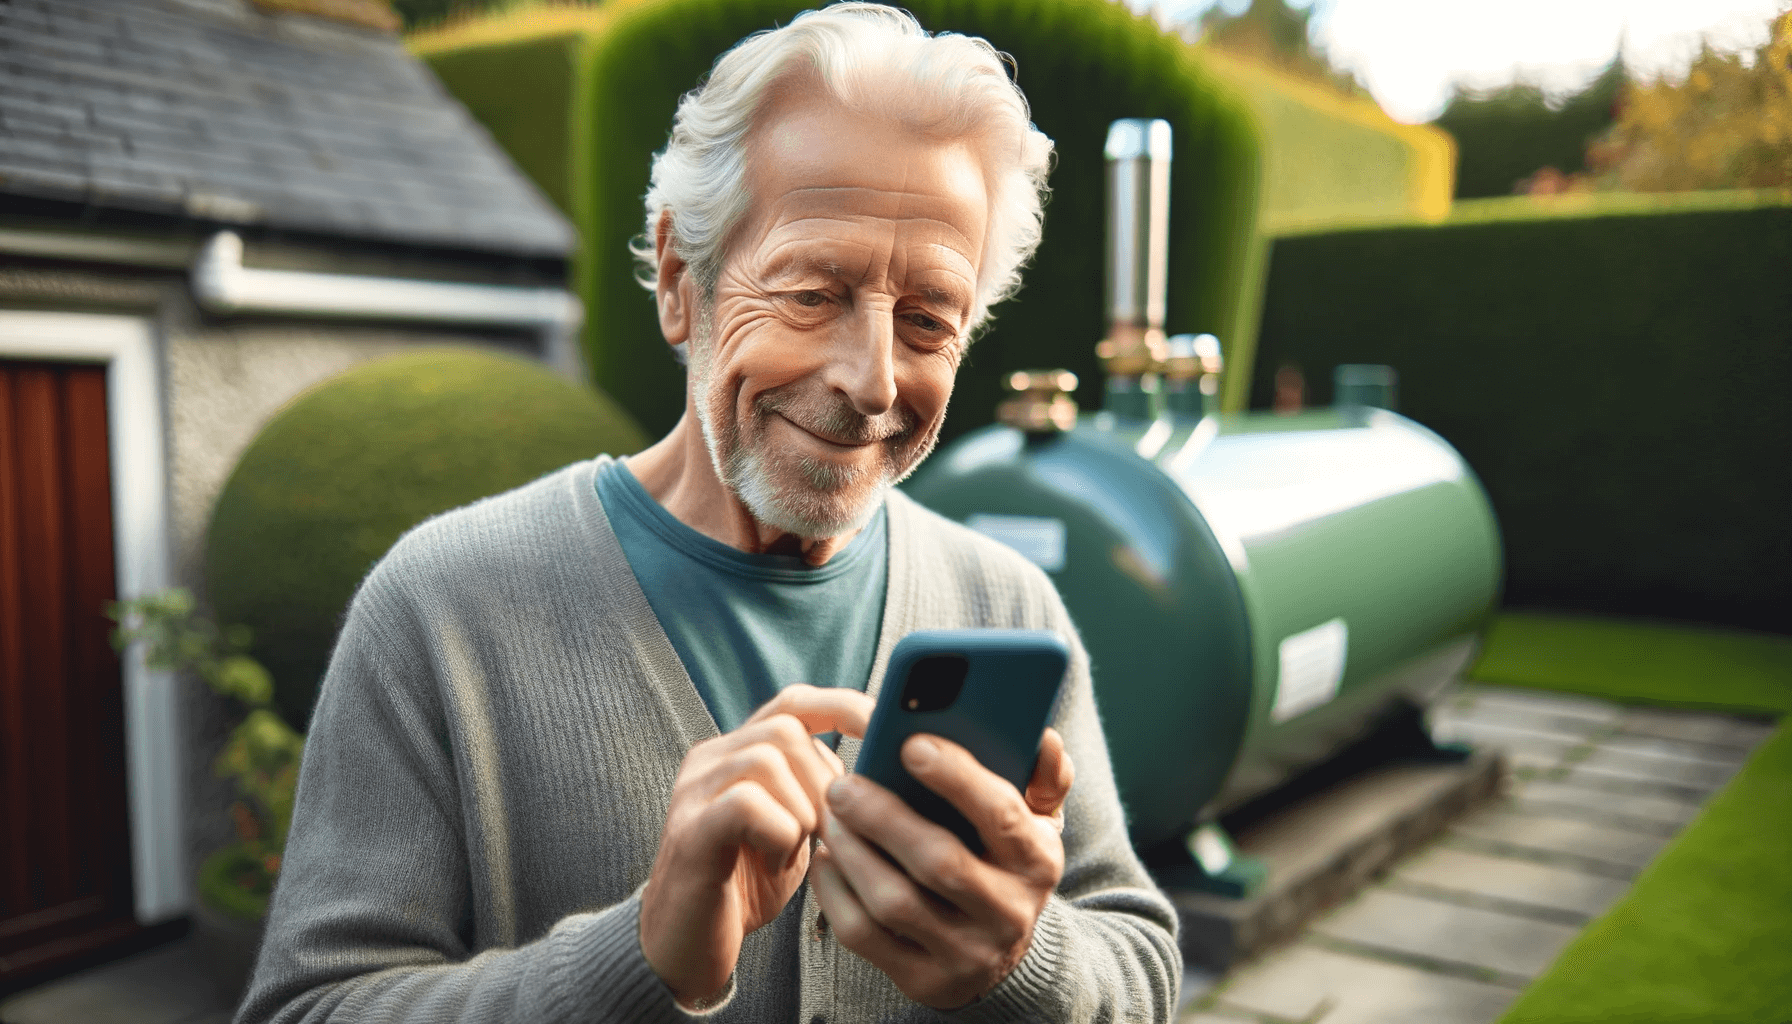 Elderly person browse phone for oil tank replacement company